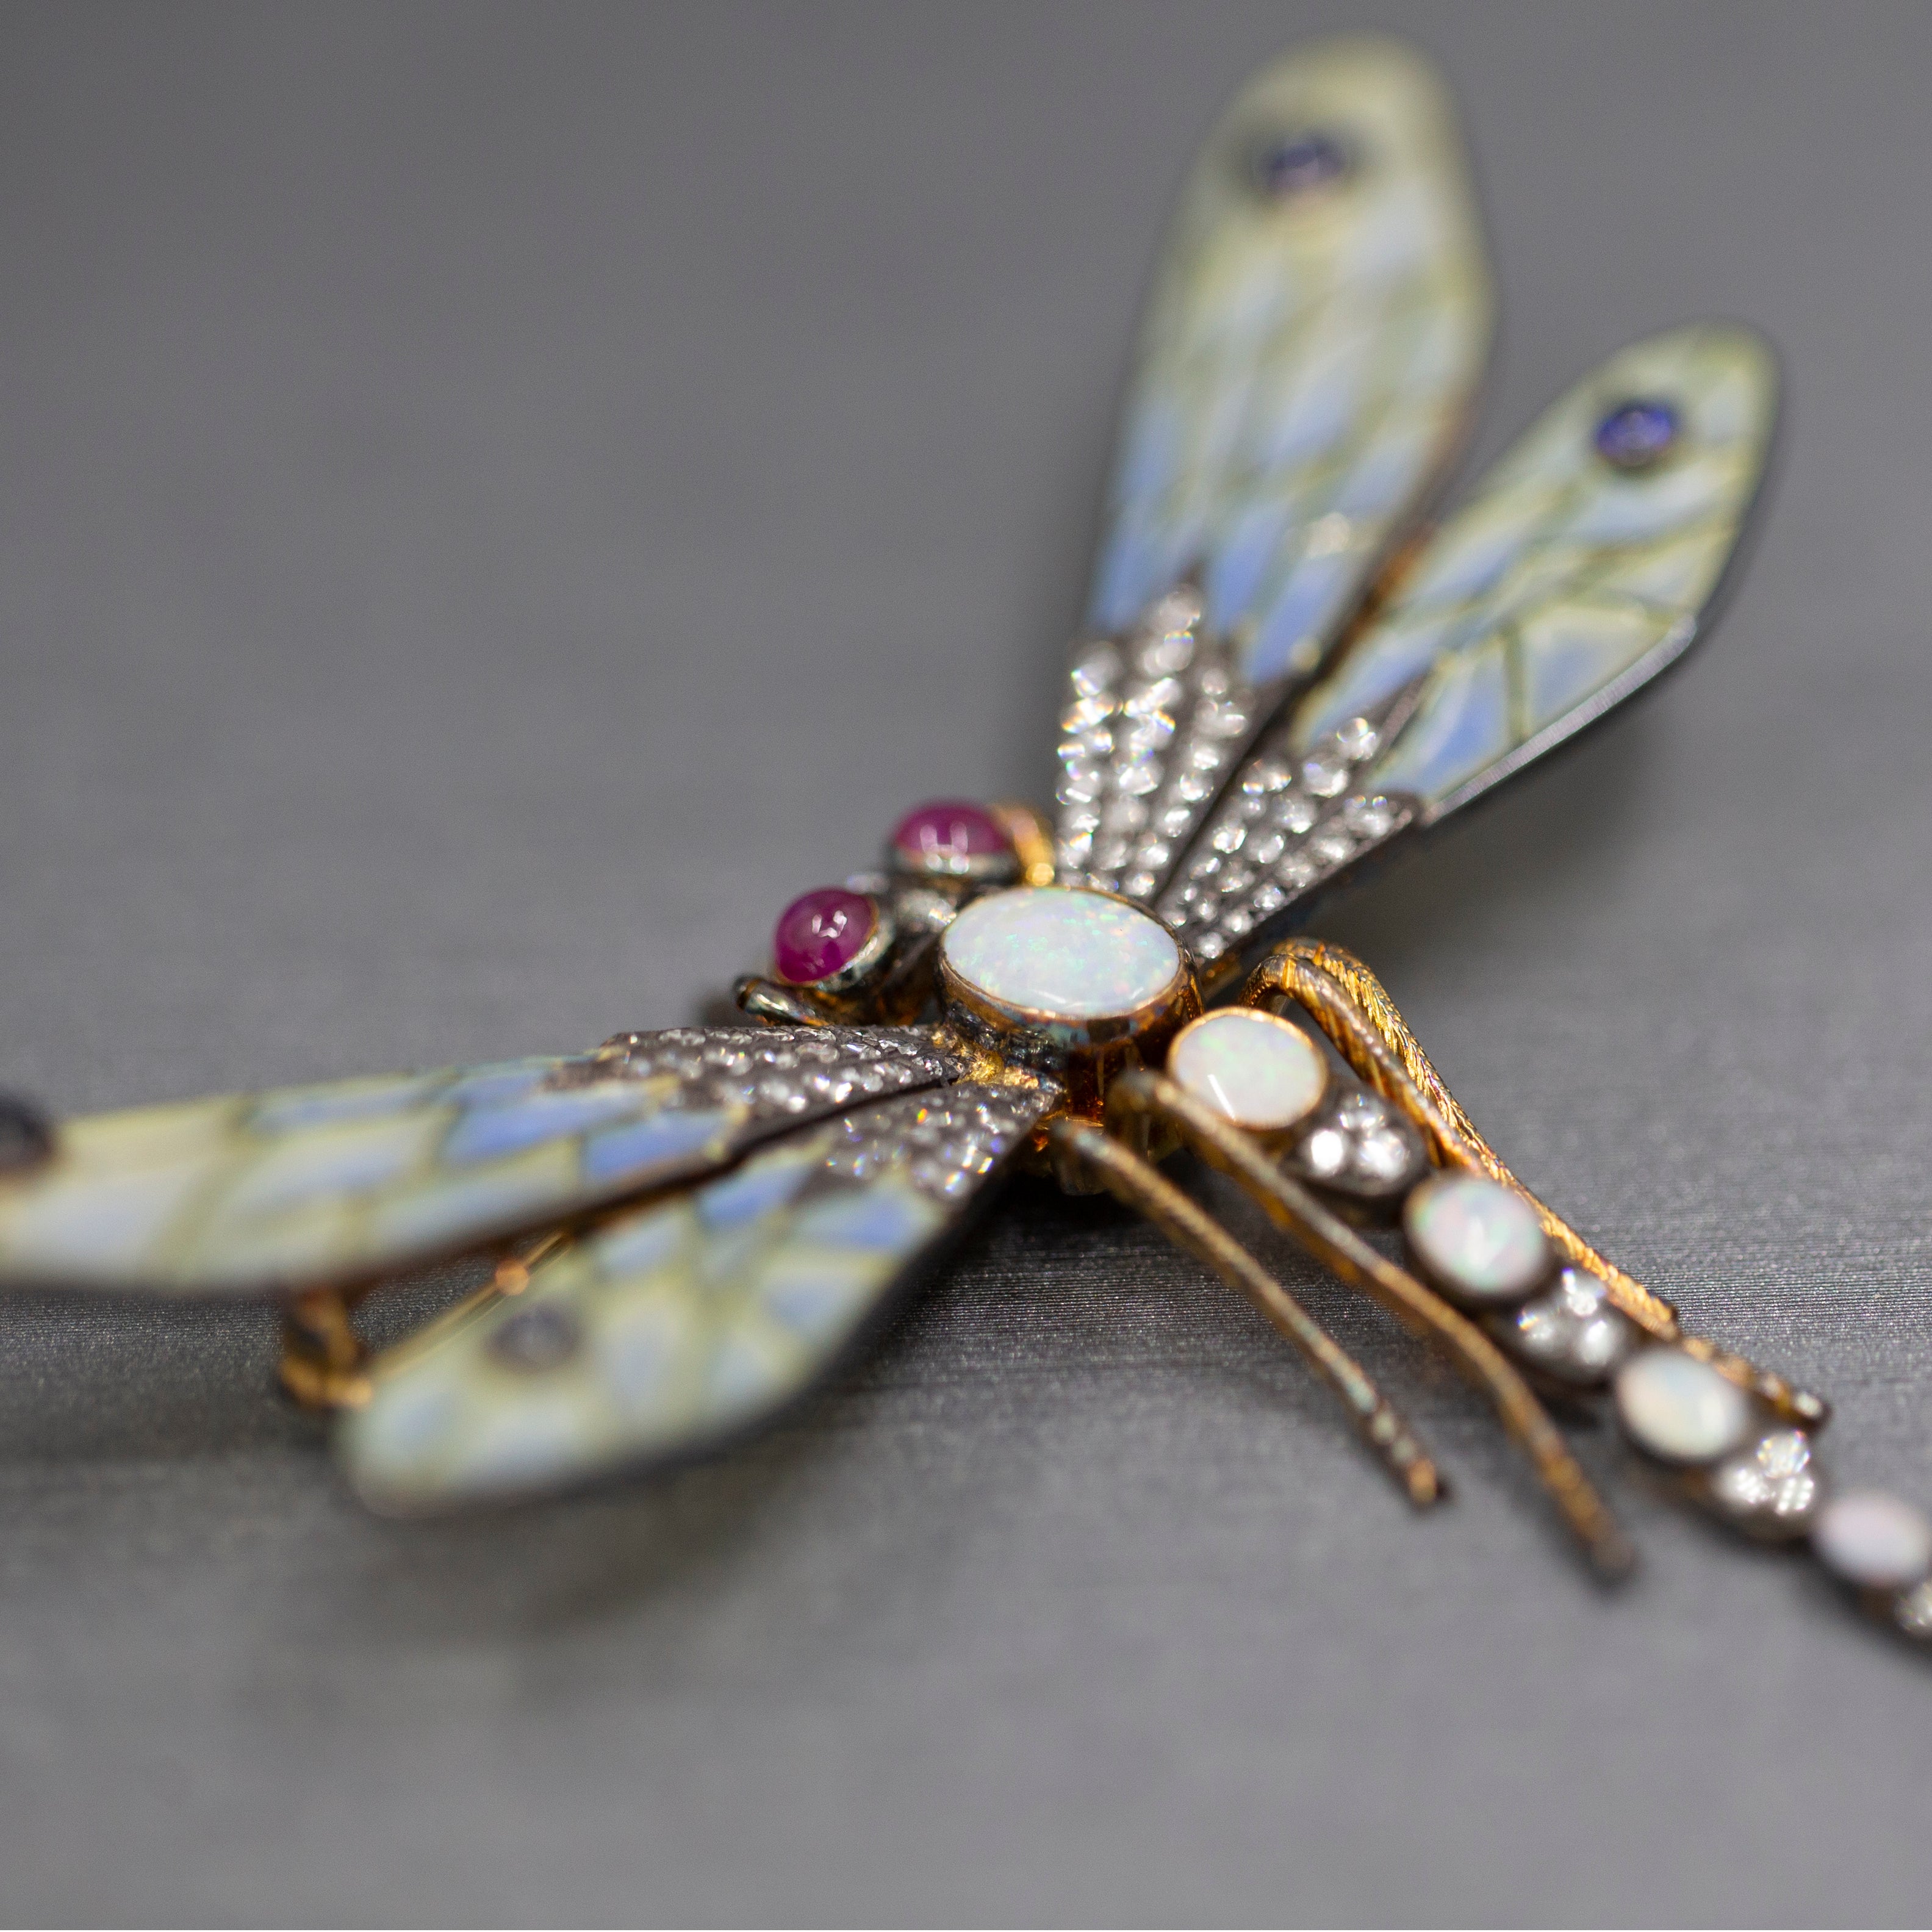 Spectacular Plique a Jour Opal Ruby Sapphire and Old Cut Diamond Dragonfly Brooch